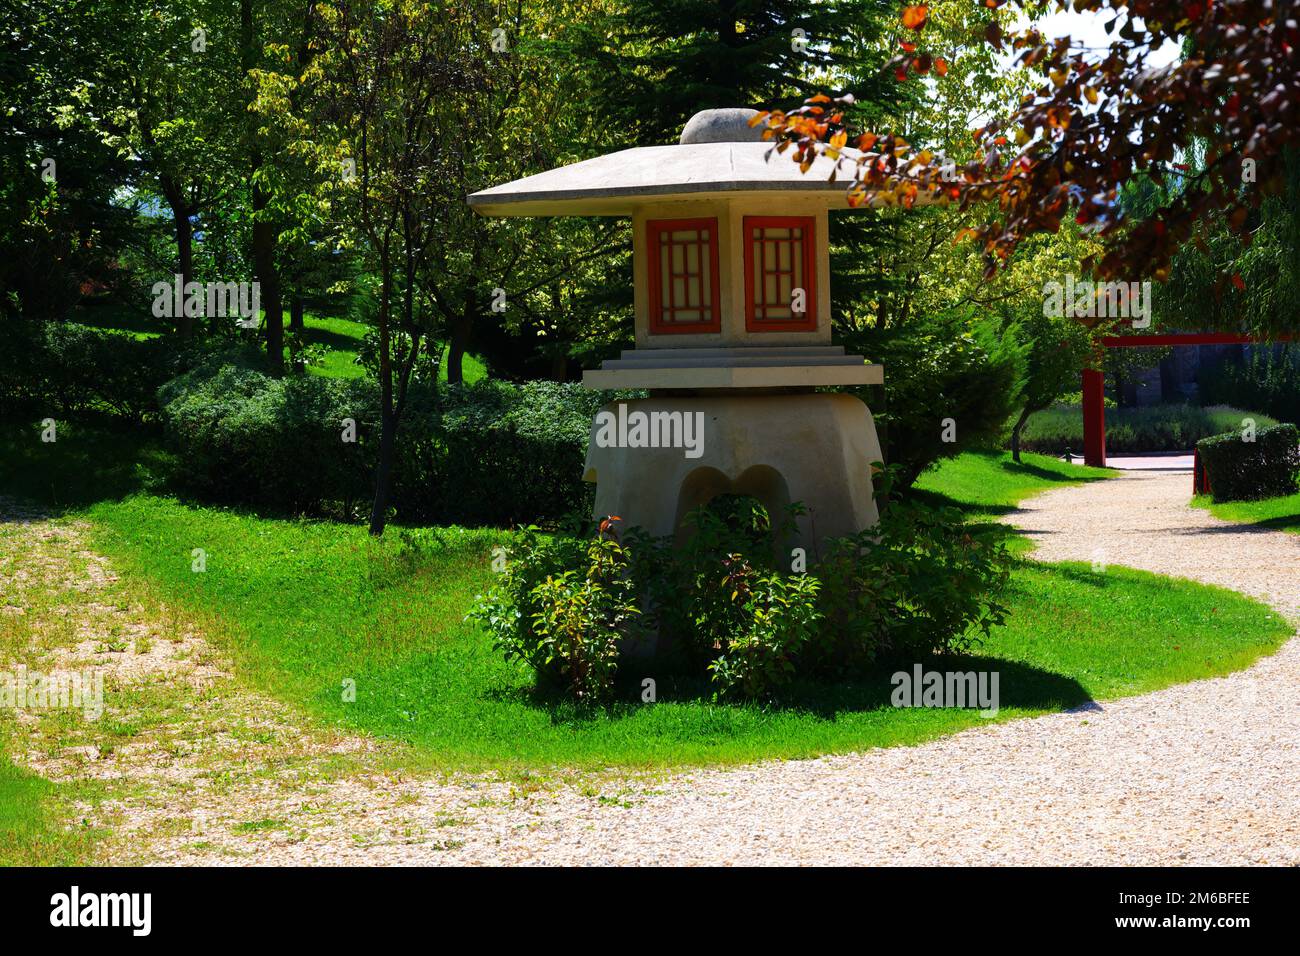 Miniature concrete watch tower at park near footpath within trees and grass in a sunny summer day Stock Photo